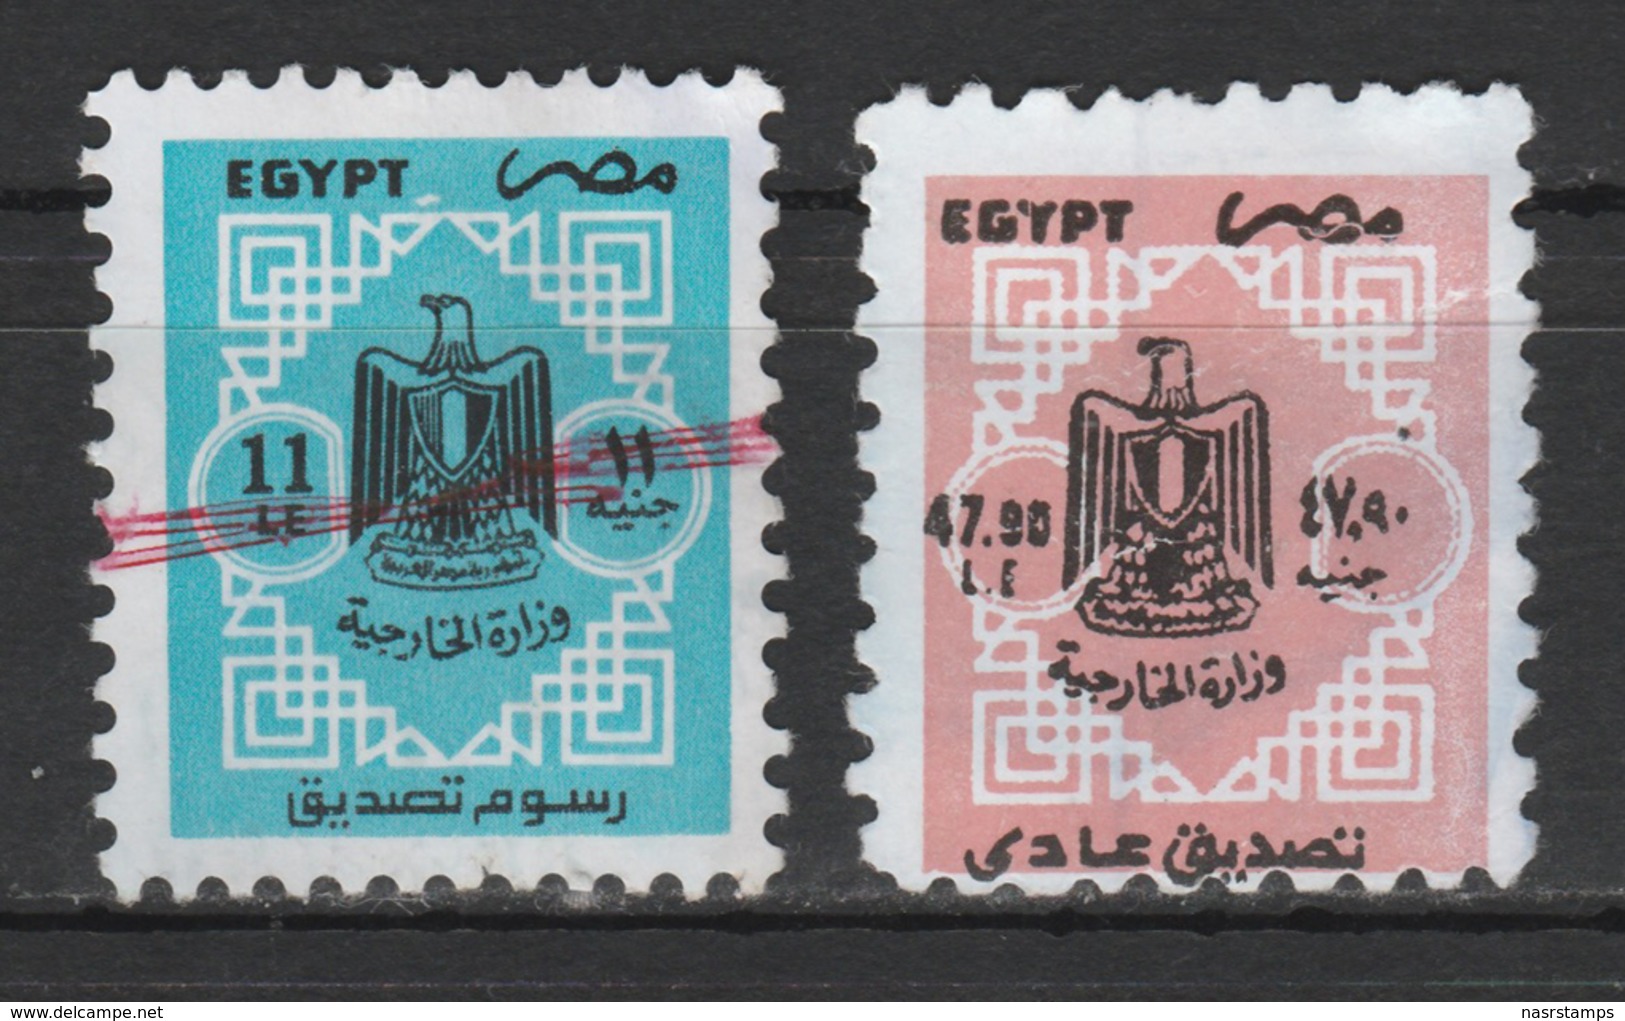 Egypt - Rare - ( Old Revenue - Ministry Of Foreign Affairs - 11 & 47.90 EGP ) Used - Usati